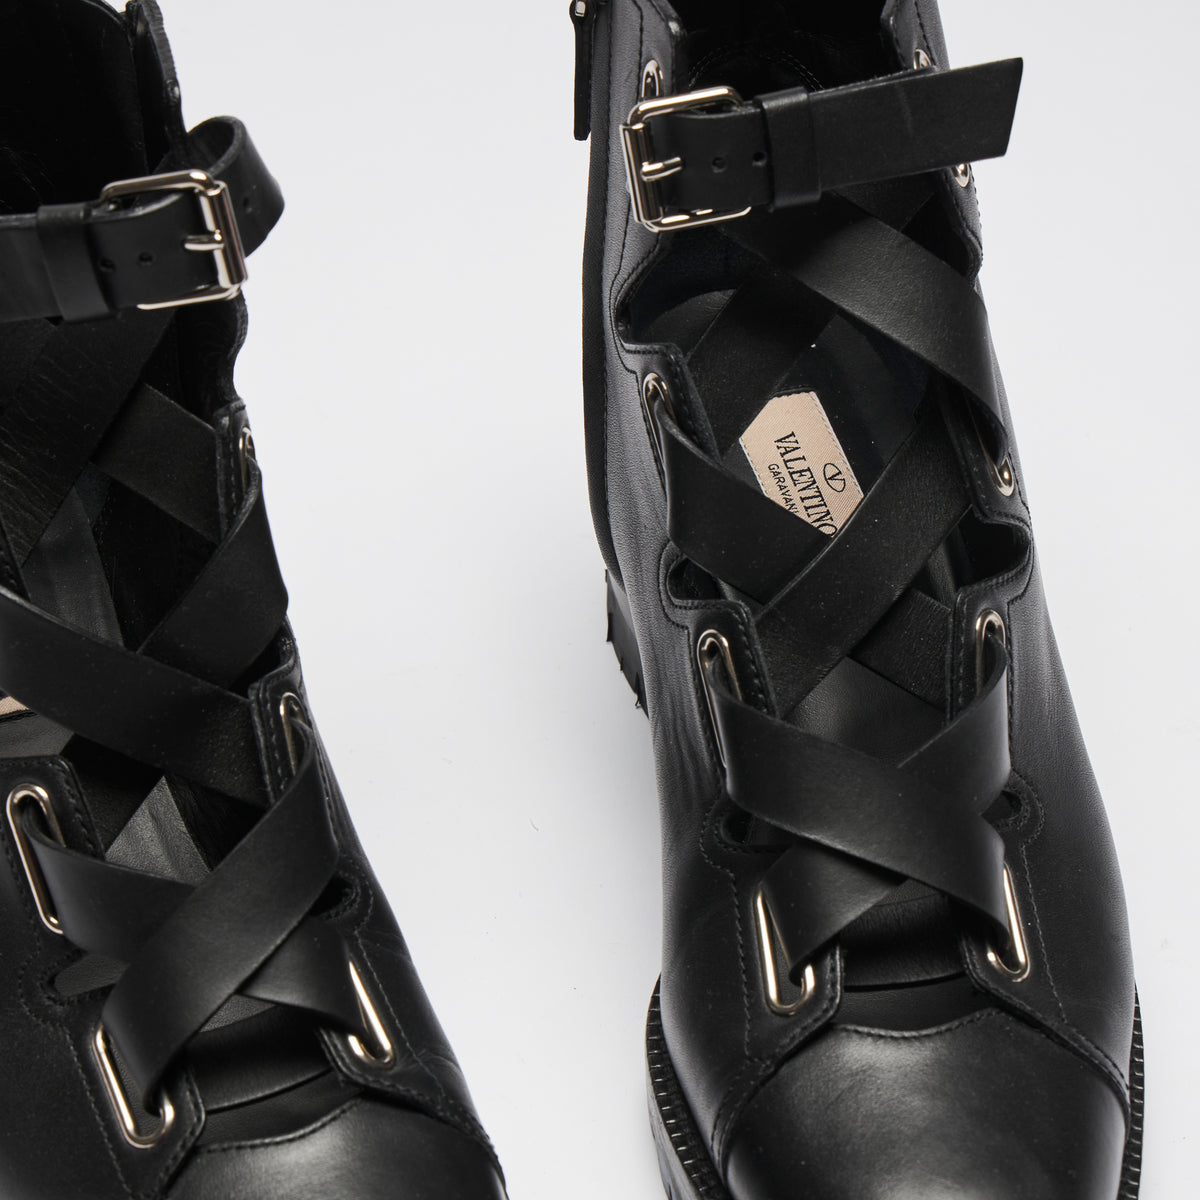 Excellent Pre-Loved Black Leather Lace Up Ankle Boots with Silver Tone Hardware and Inside Zip.(details)